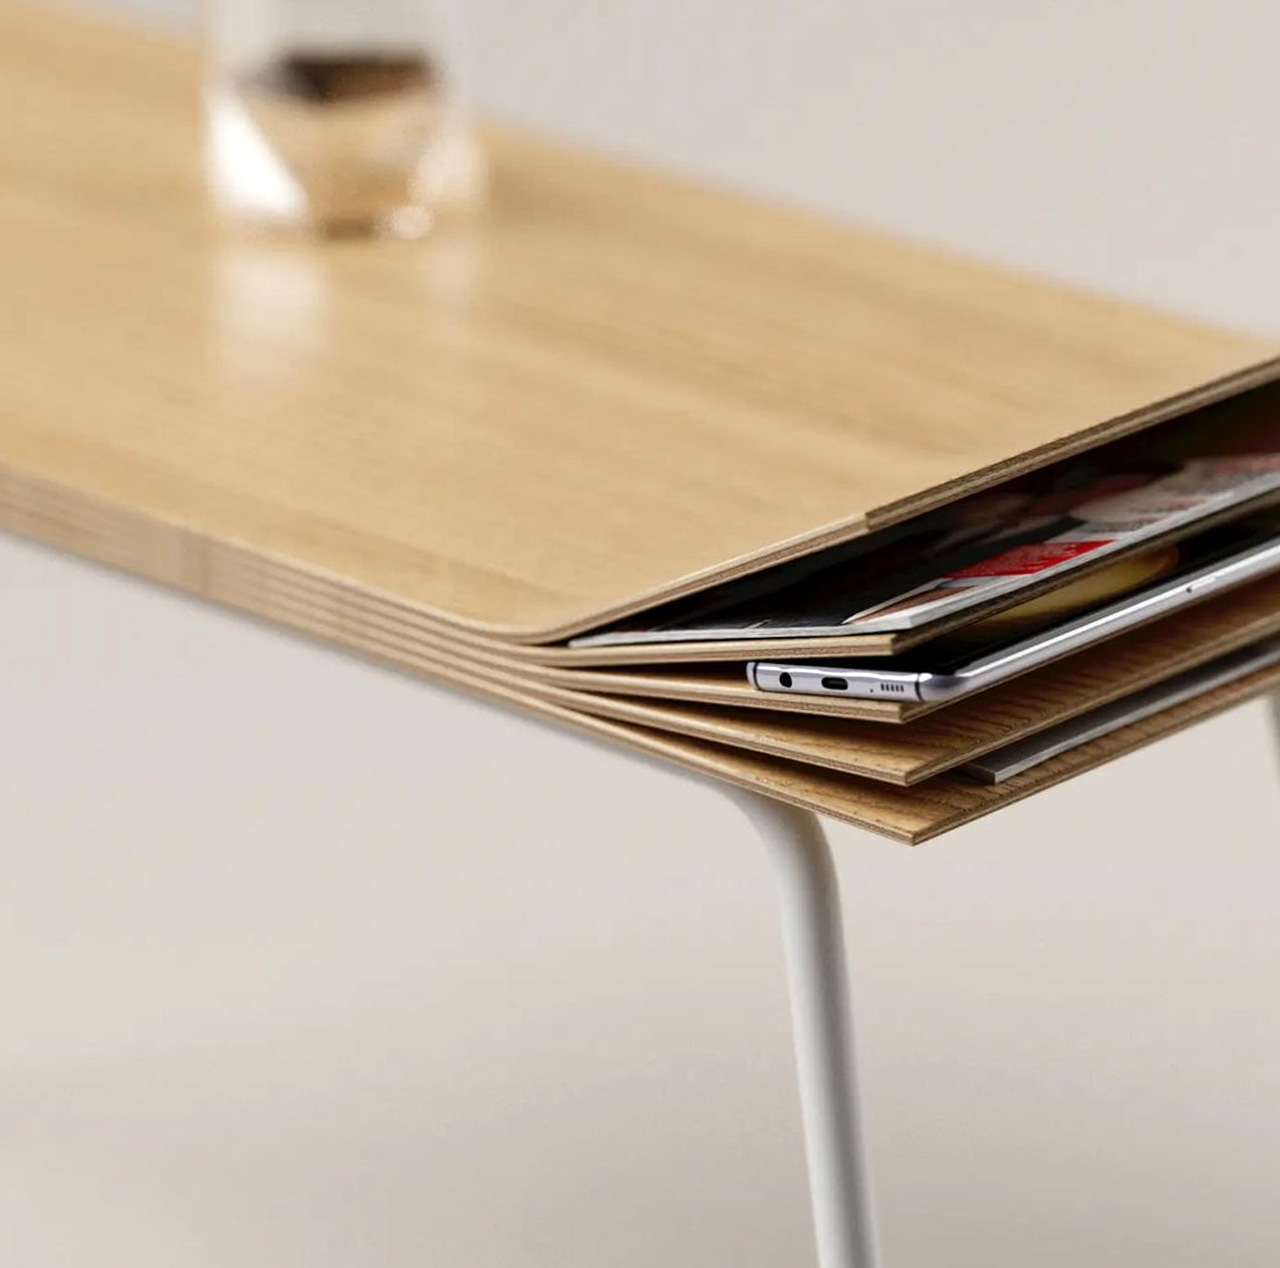 The Flitter Console Table has a splintering end that creates multiple little storage "pockets"